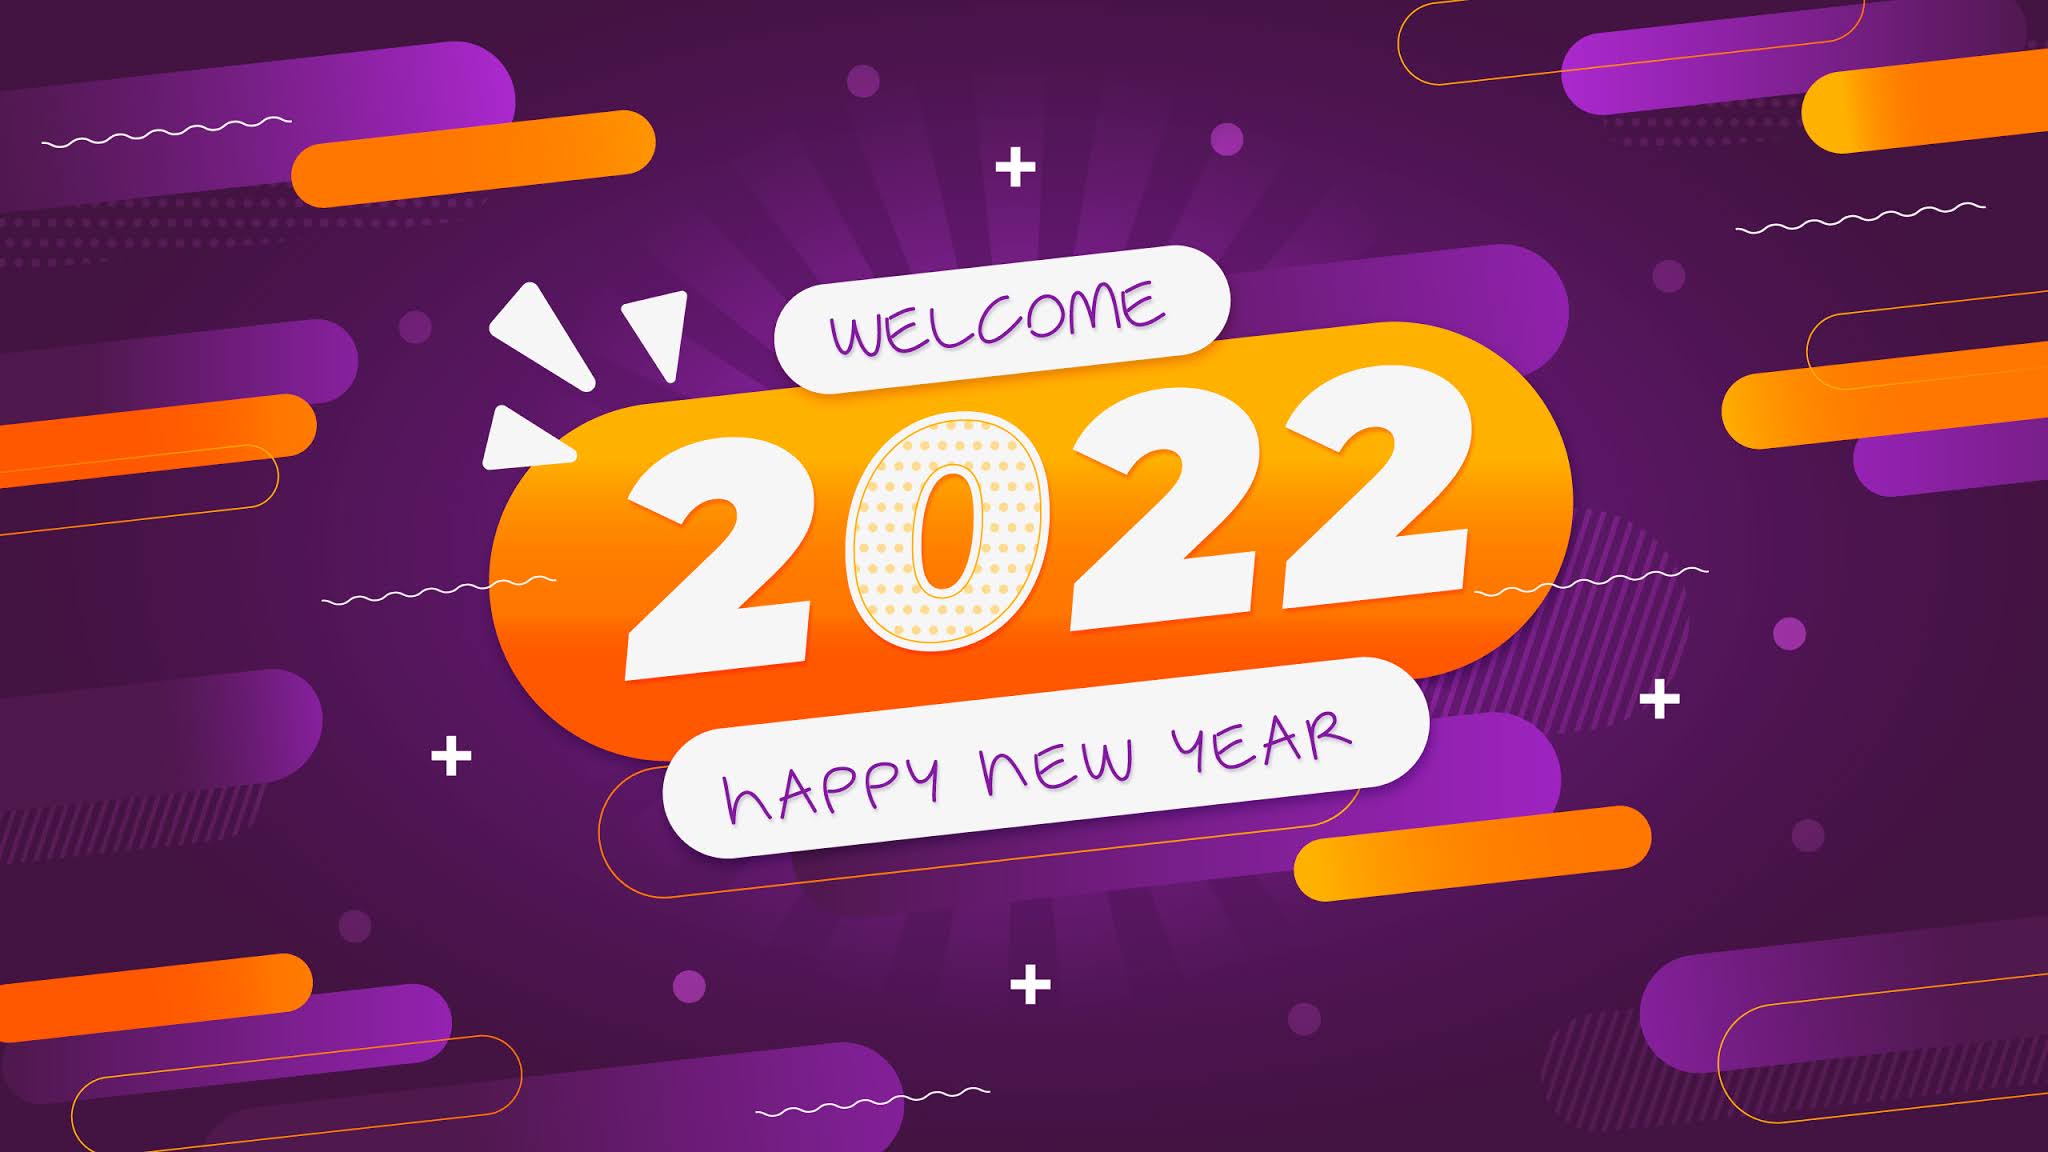 Welcome 2022 Happy New Year Wallpaper